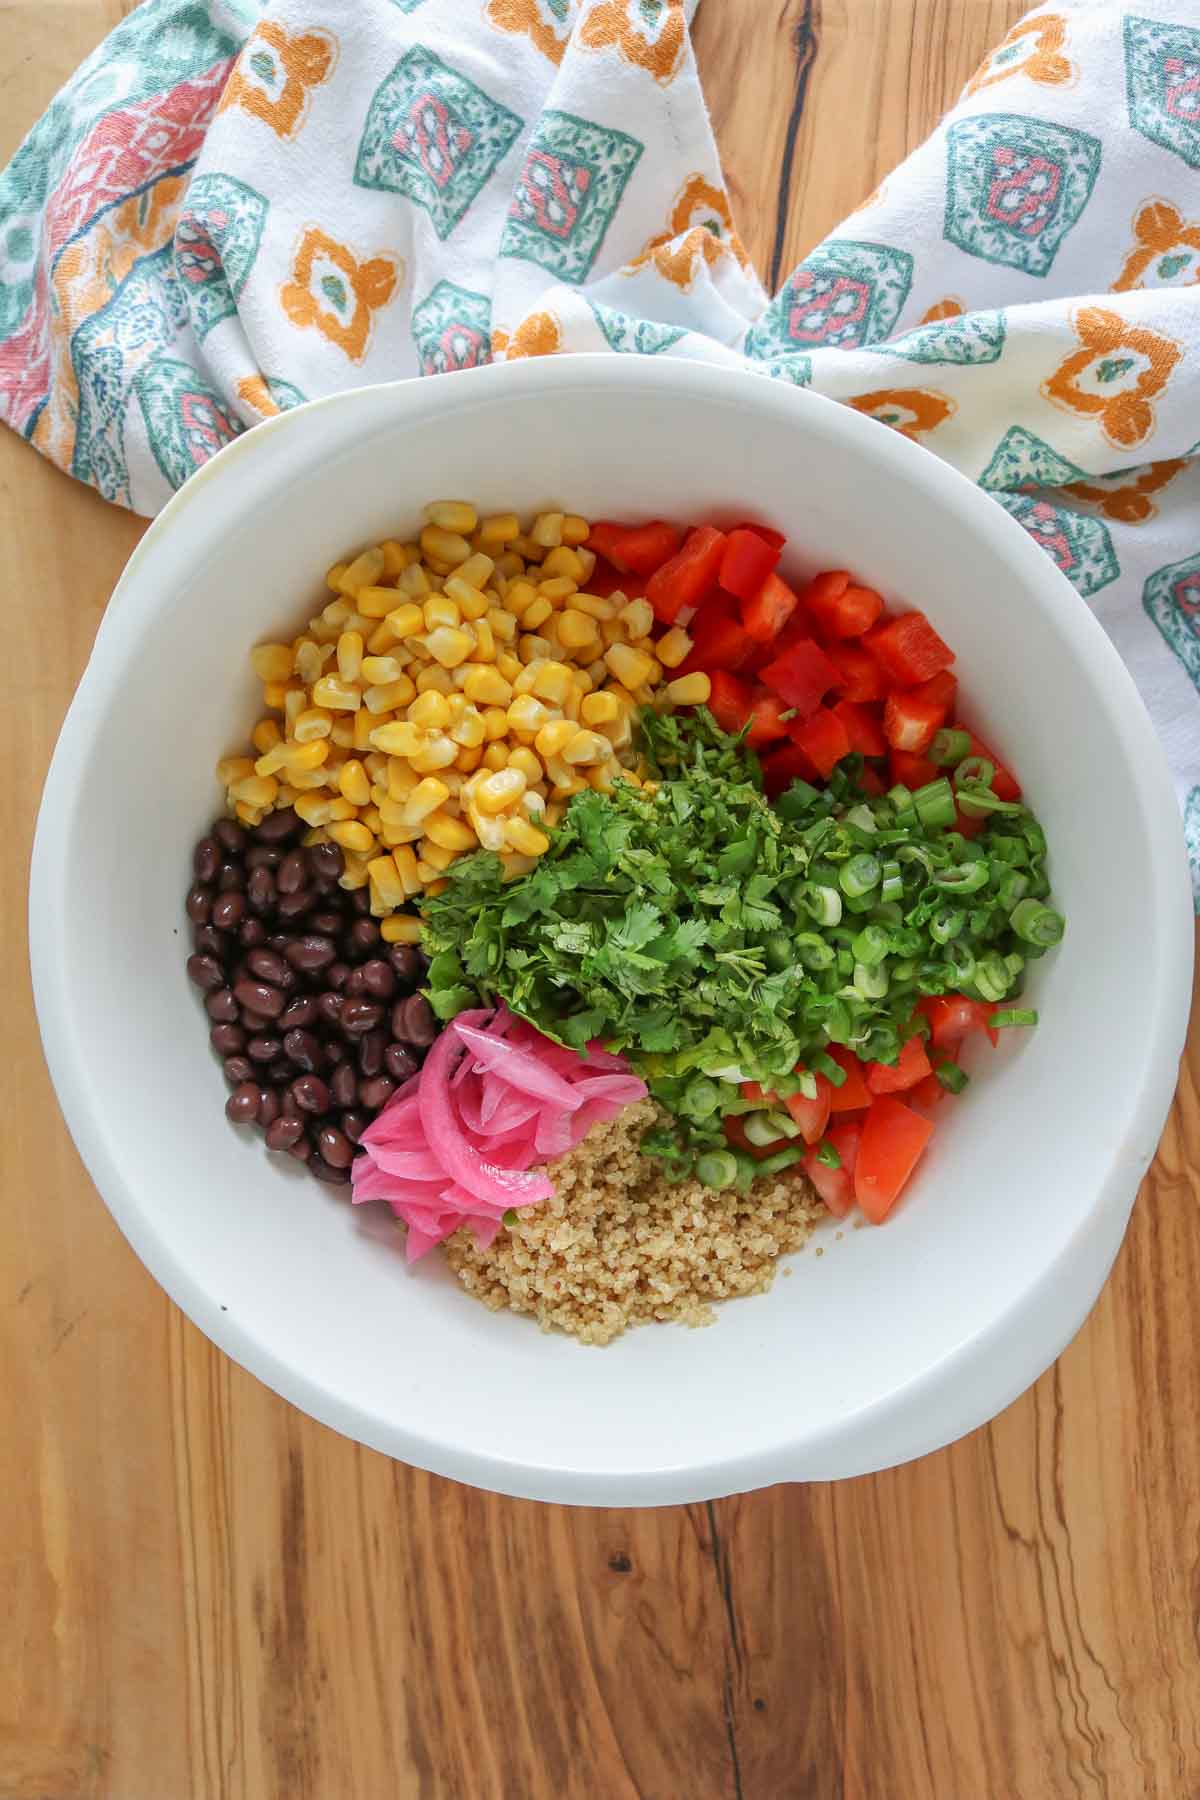 Quinoa salad ingredients in a bowl before being mixed together.